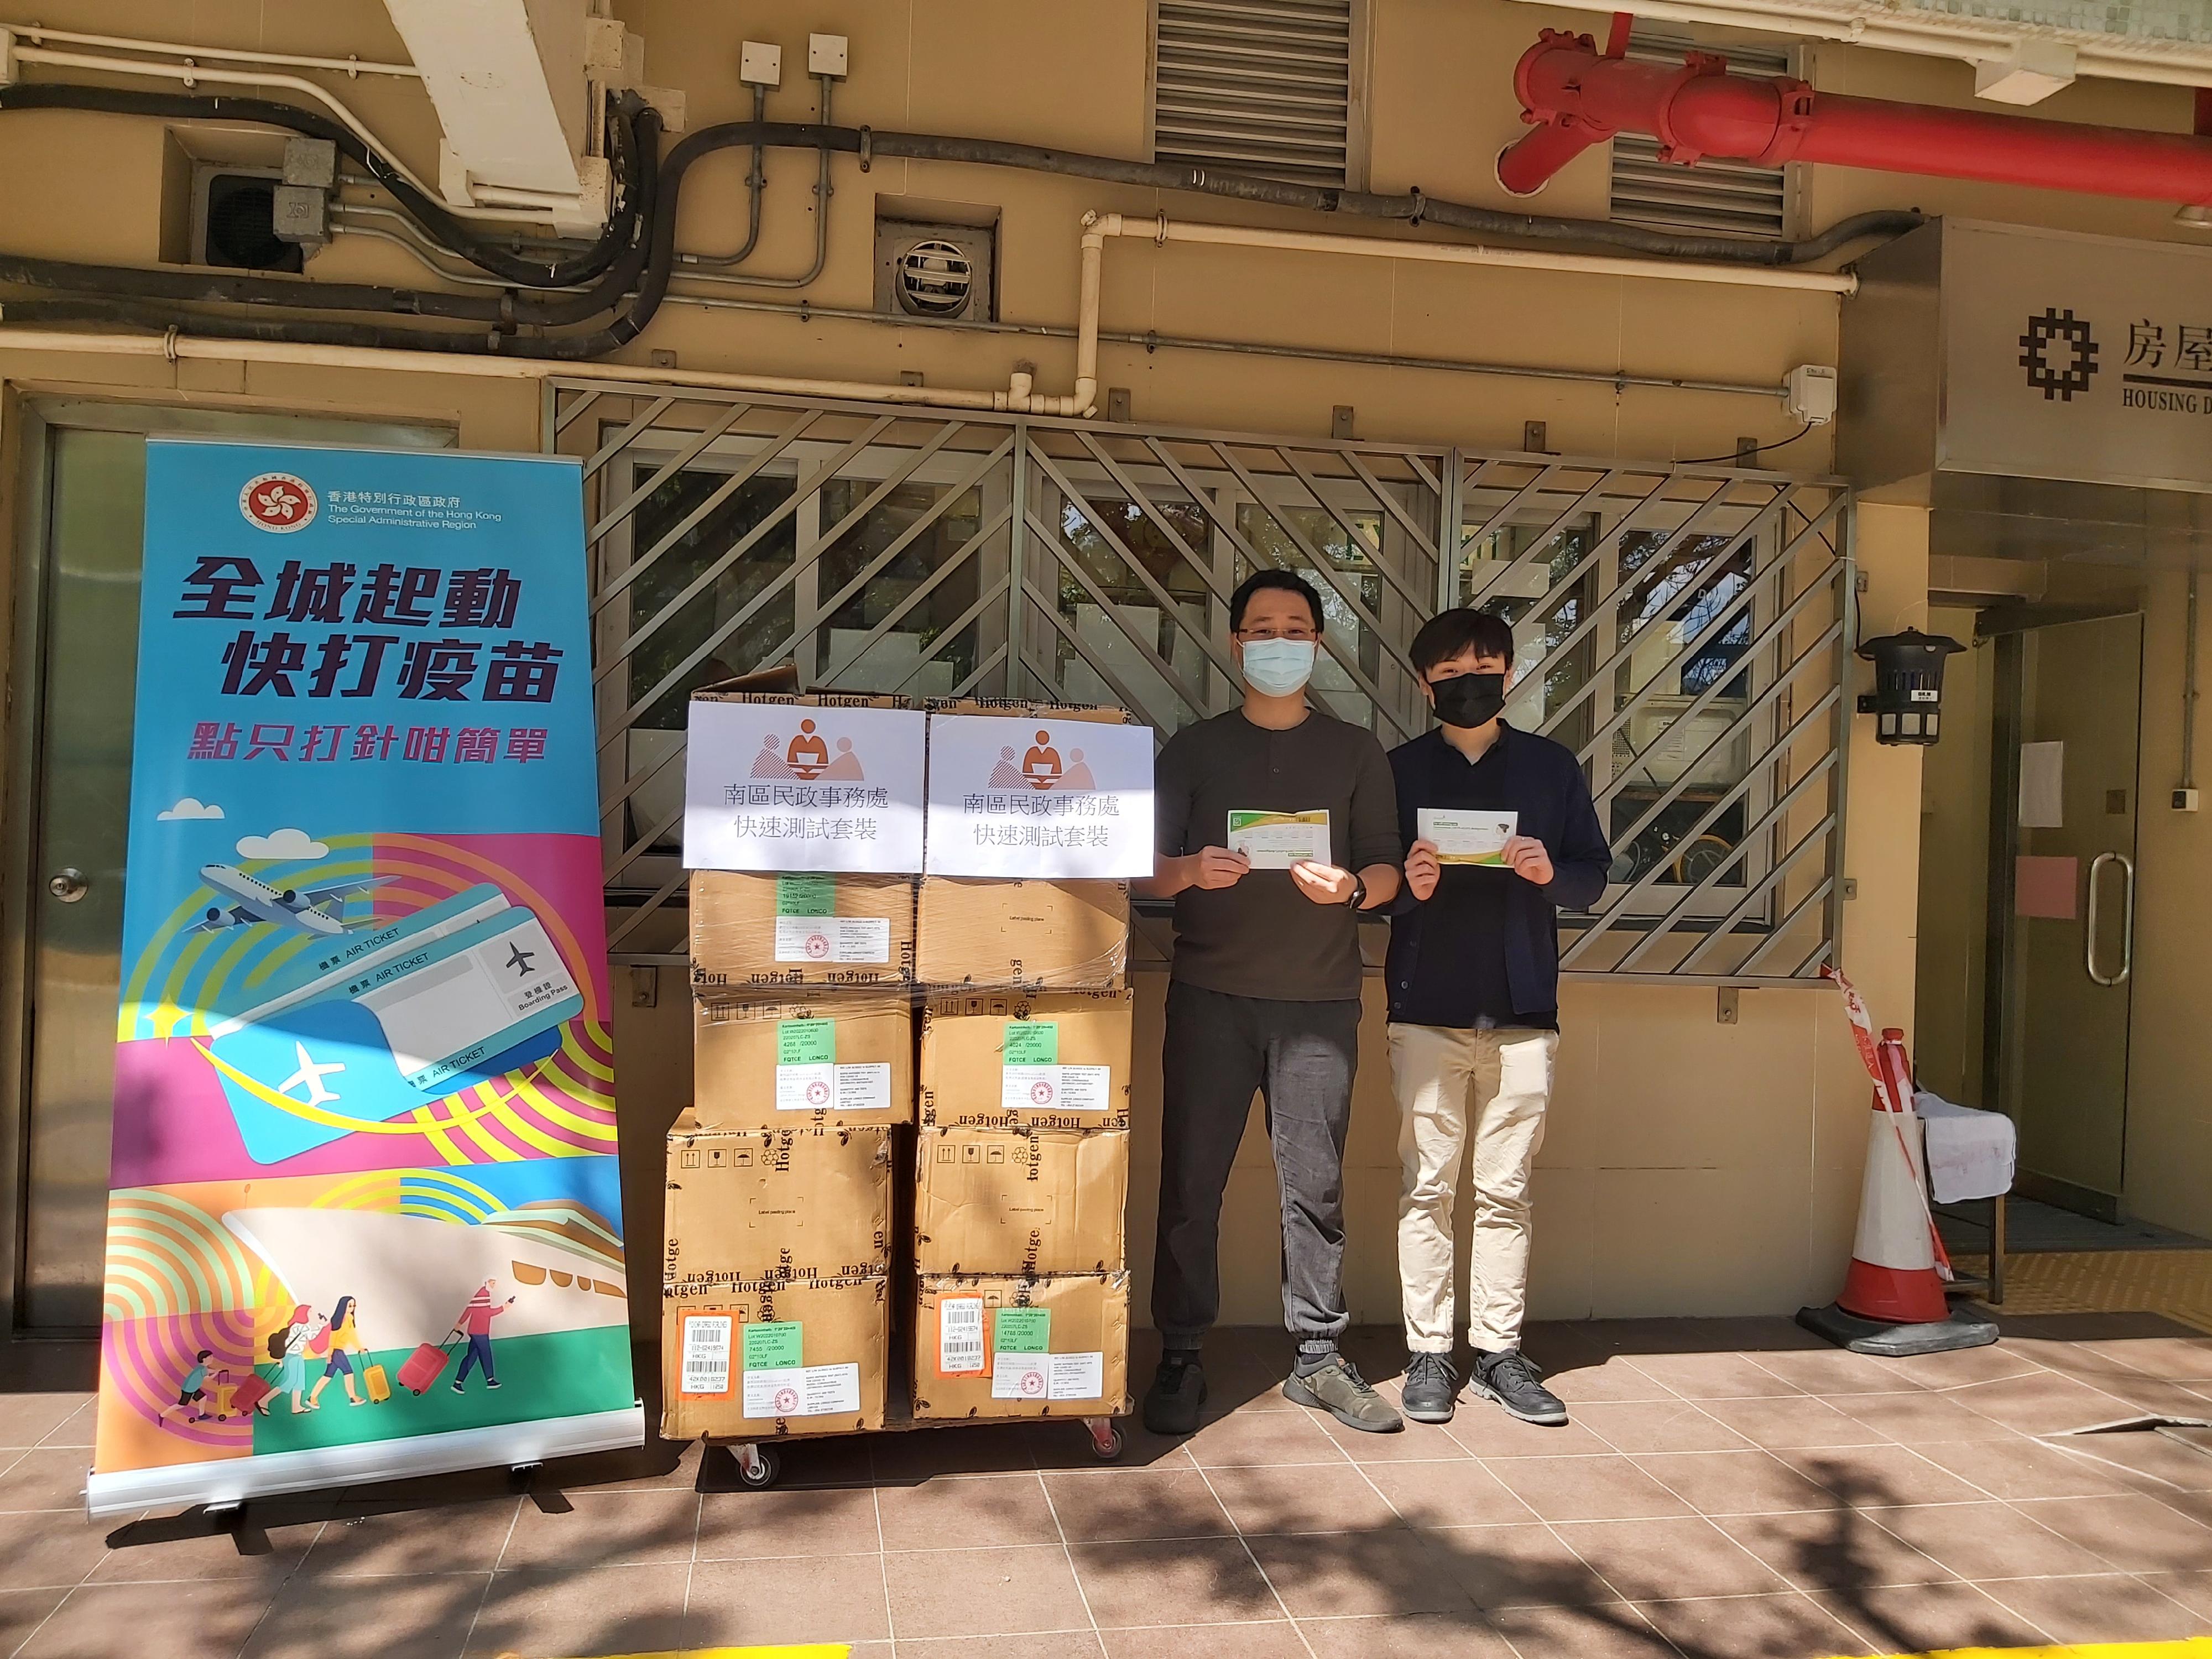 The Southern District Office today (March 11) distributed COVID-19 rapid test kits to households, cleansing workers and property management staff living and working in Ap Lei Chau Estate for voluntary testing through the Housing Department.